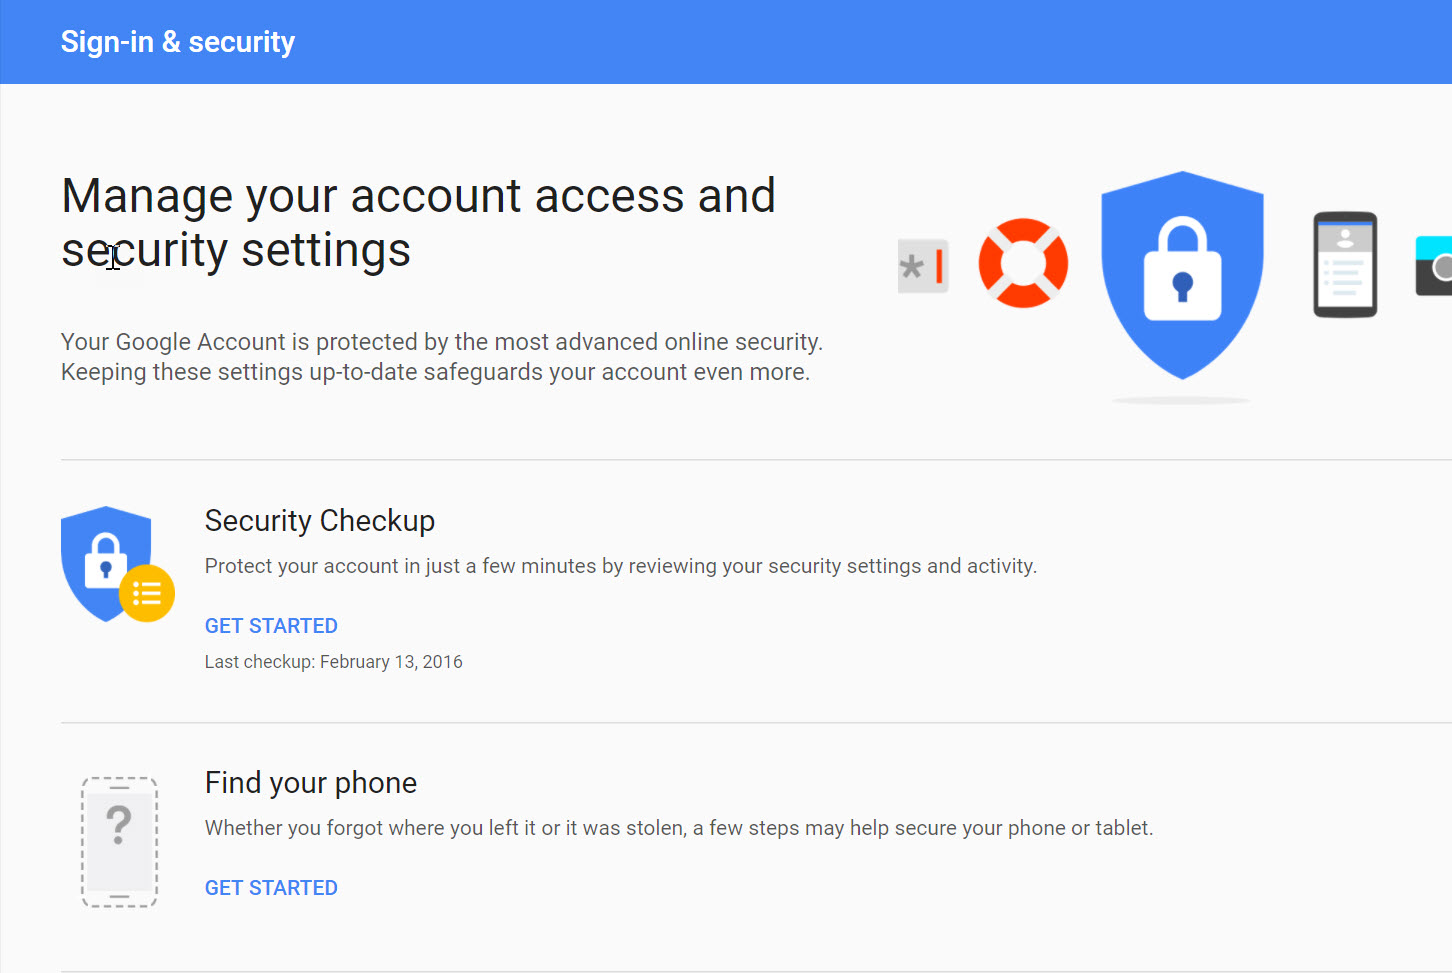 Google account protect. Google safer email. Http://myaccount.Google. Com/find-your-Phone.